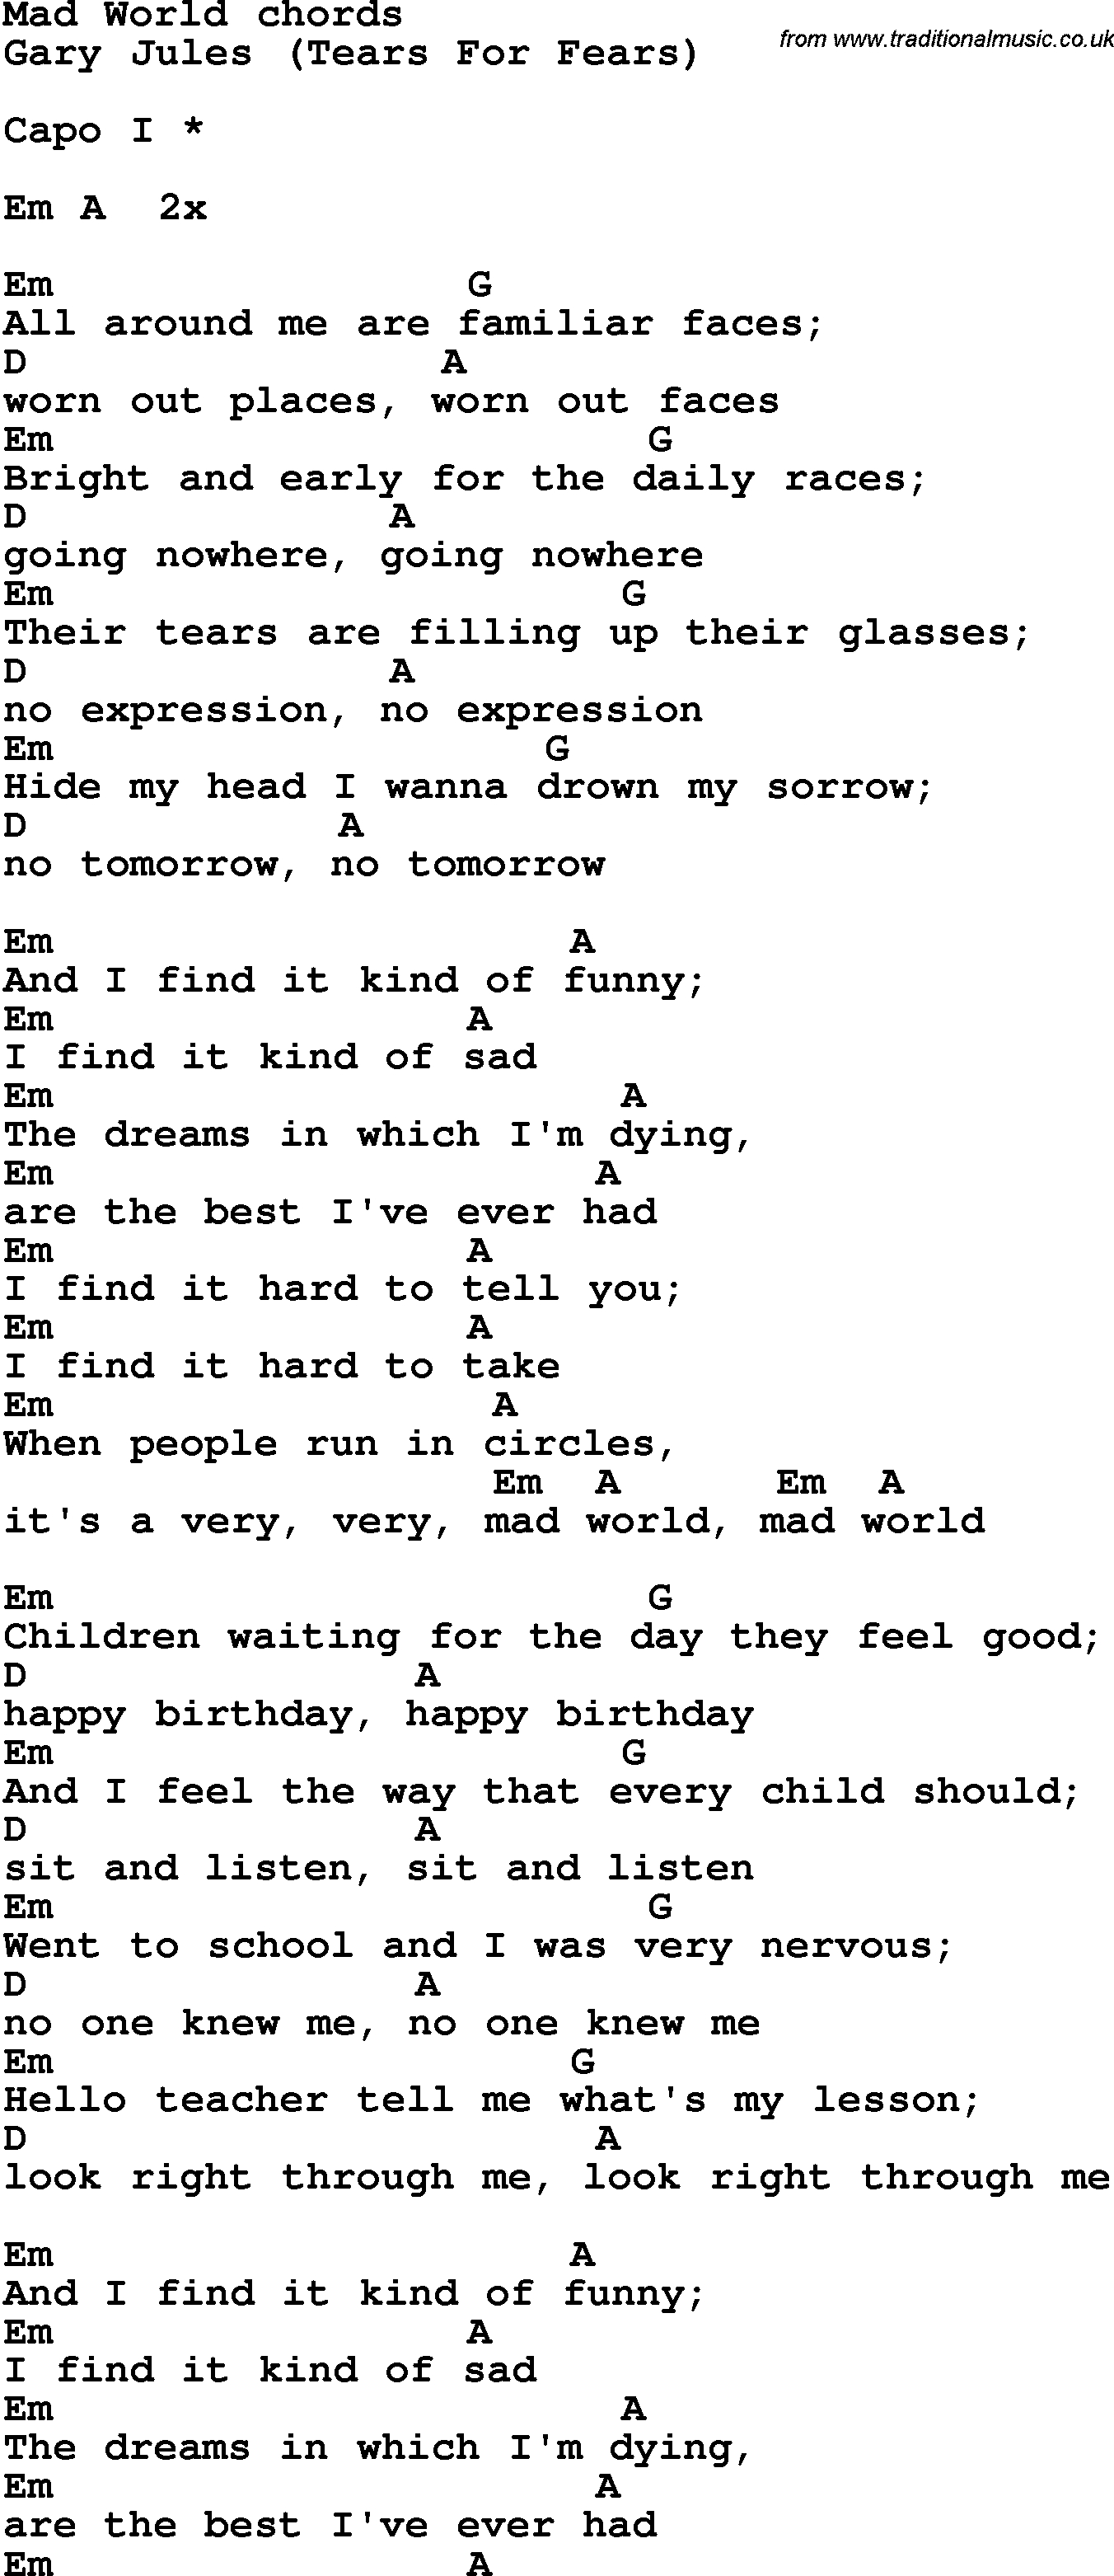 Mad World Chords Song Lyrics With Guitar Chords For Mad World